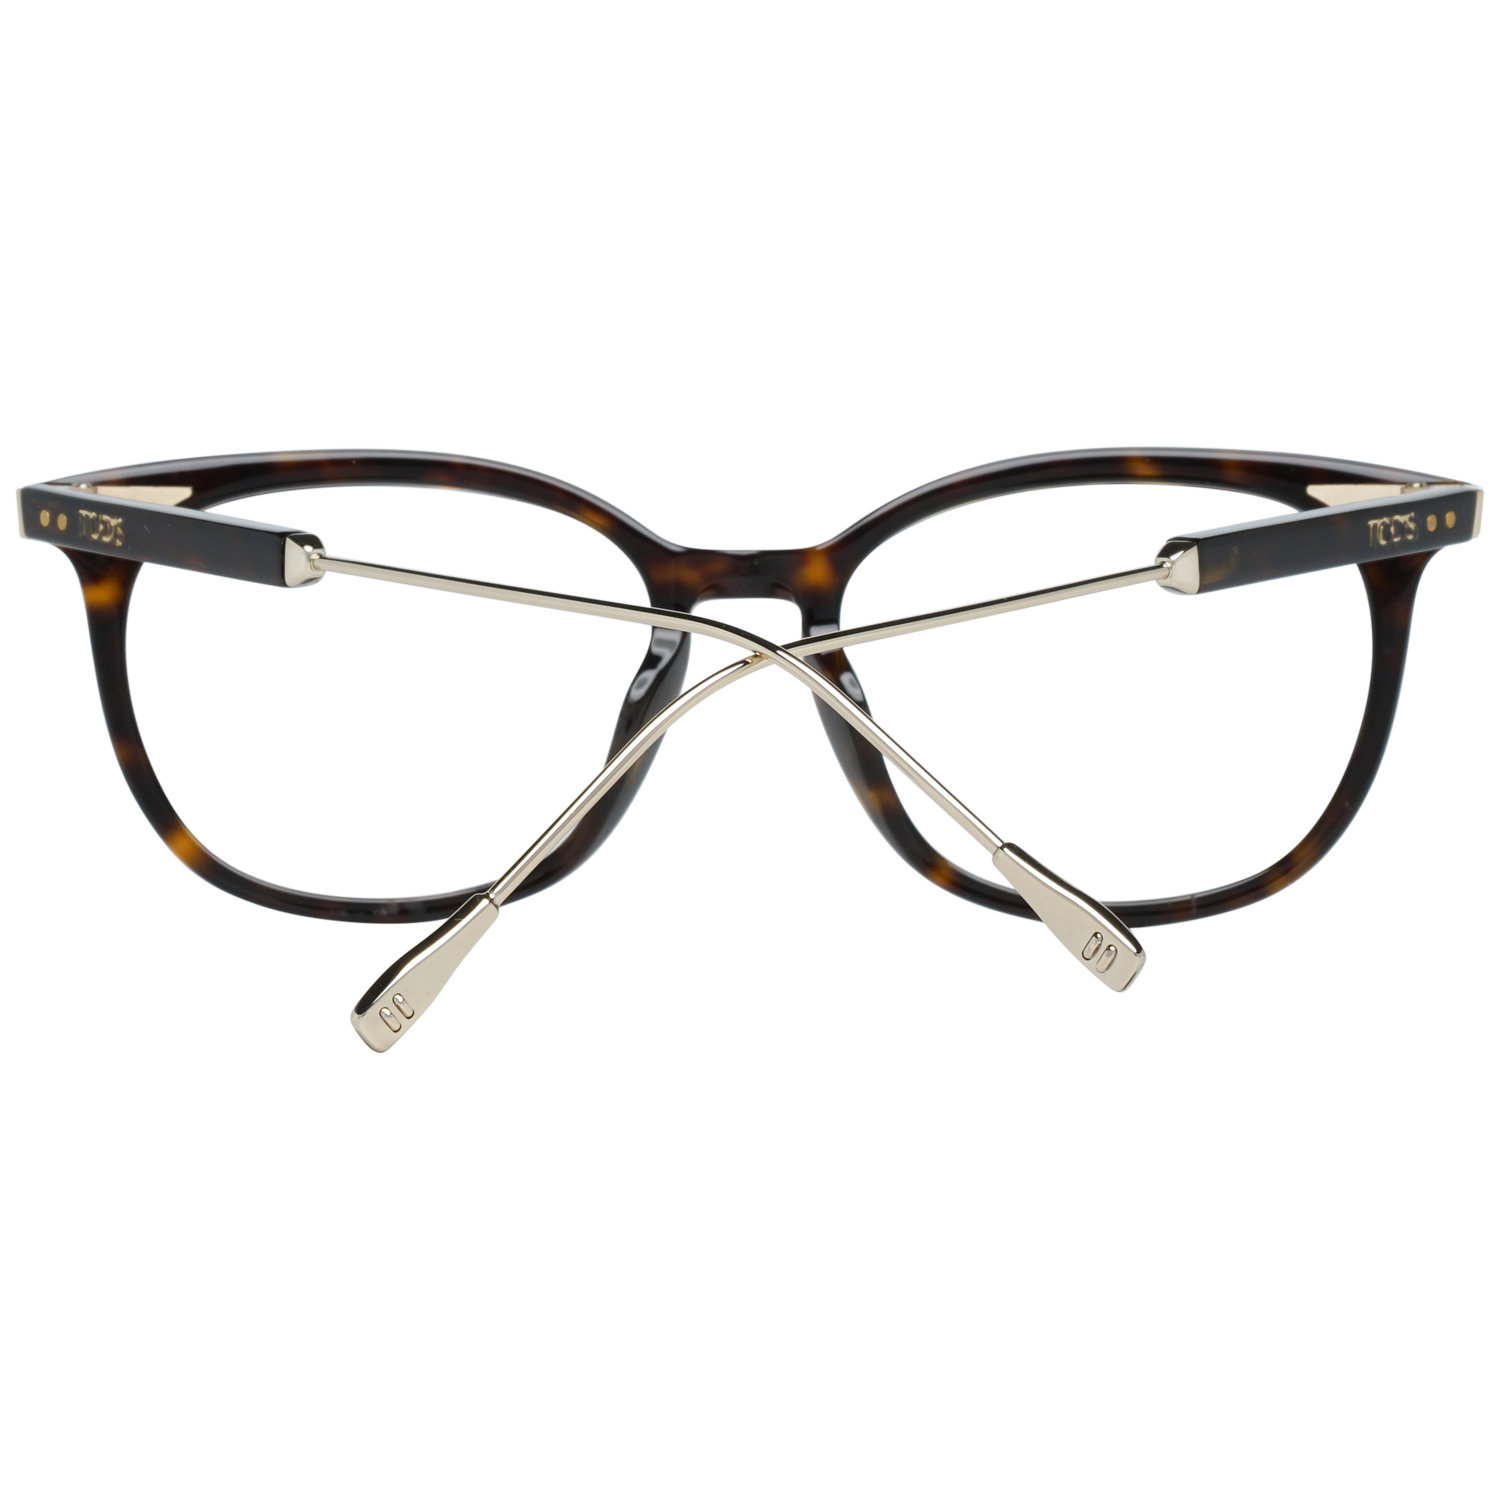 Tods Optical Frame TO5202 052 52 Women
Frame color: Brown
Size: 52-16-145
Lenses width: 52
Lenses heigth: 46
Bridge length: 16
Frame width: 137
Temple length: 145
Shipment includes: Case, Cleaning cloth
Style: Full-Rim
Spring hinge: No